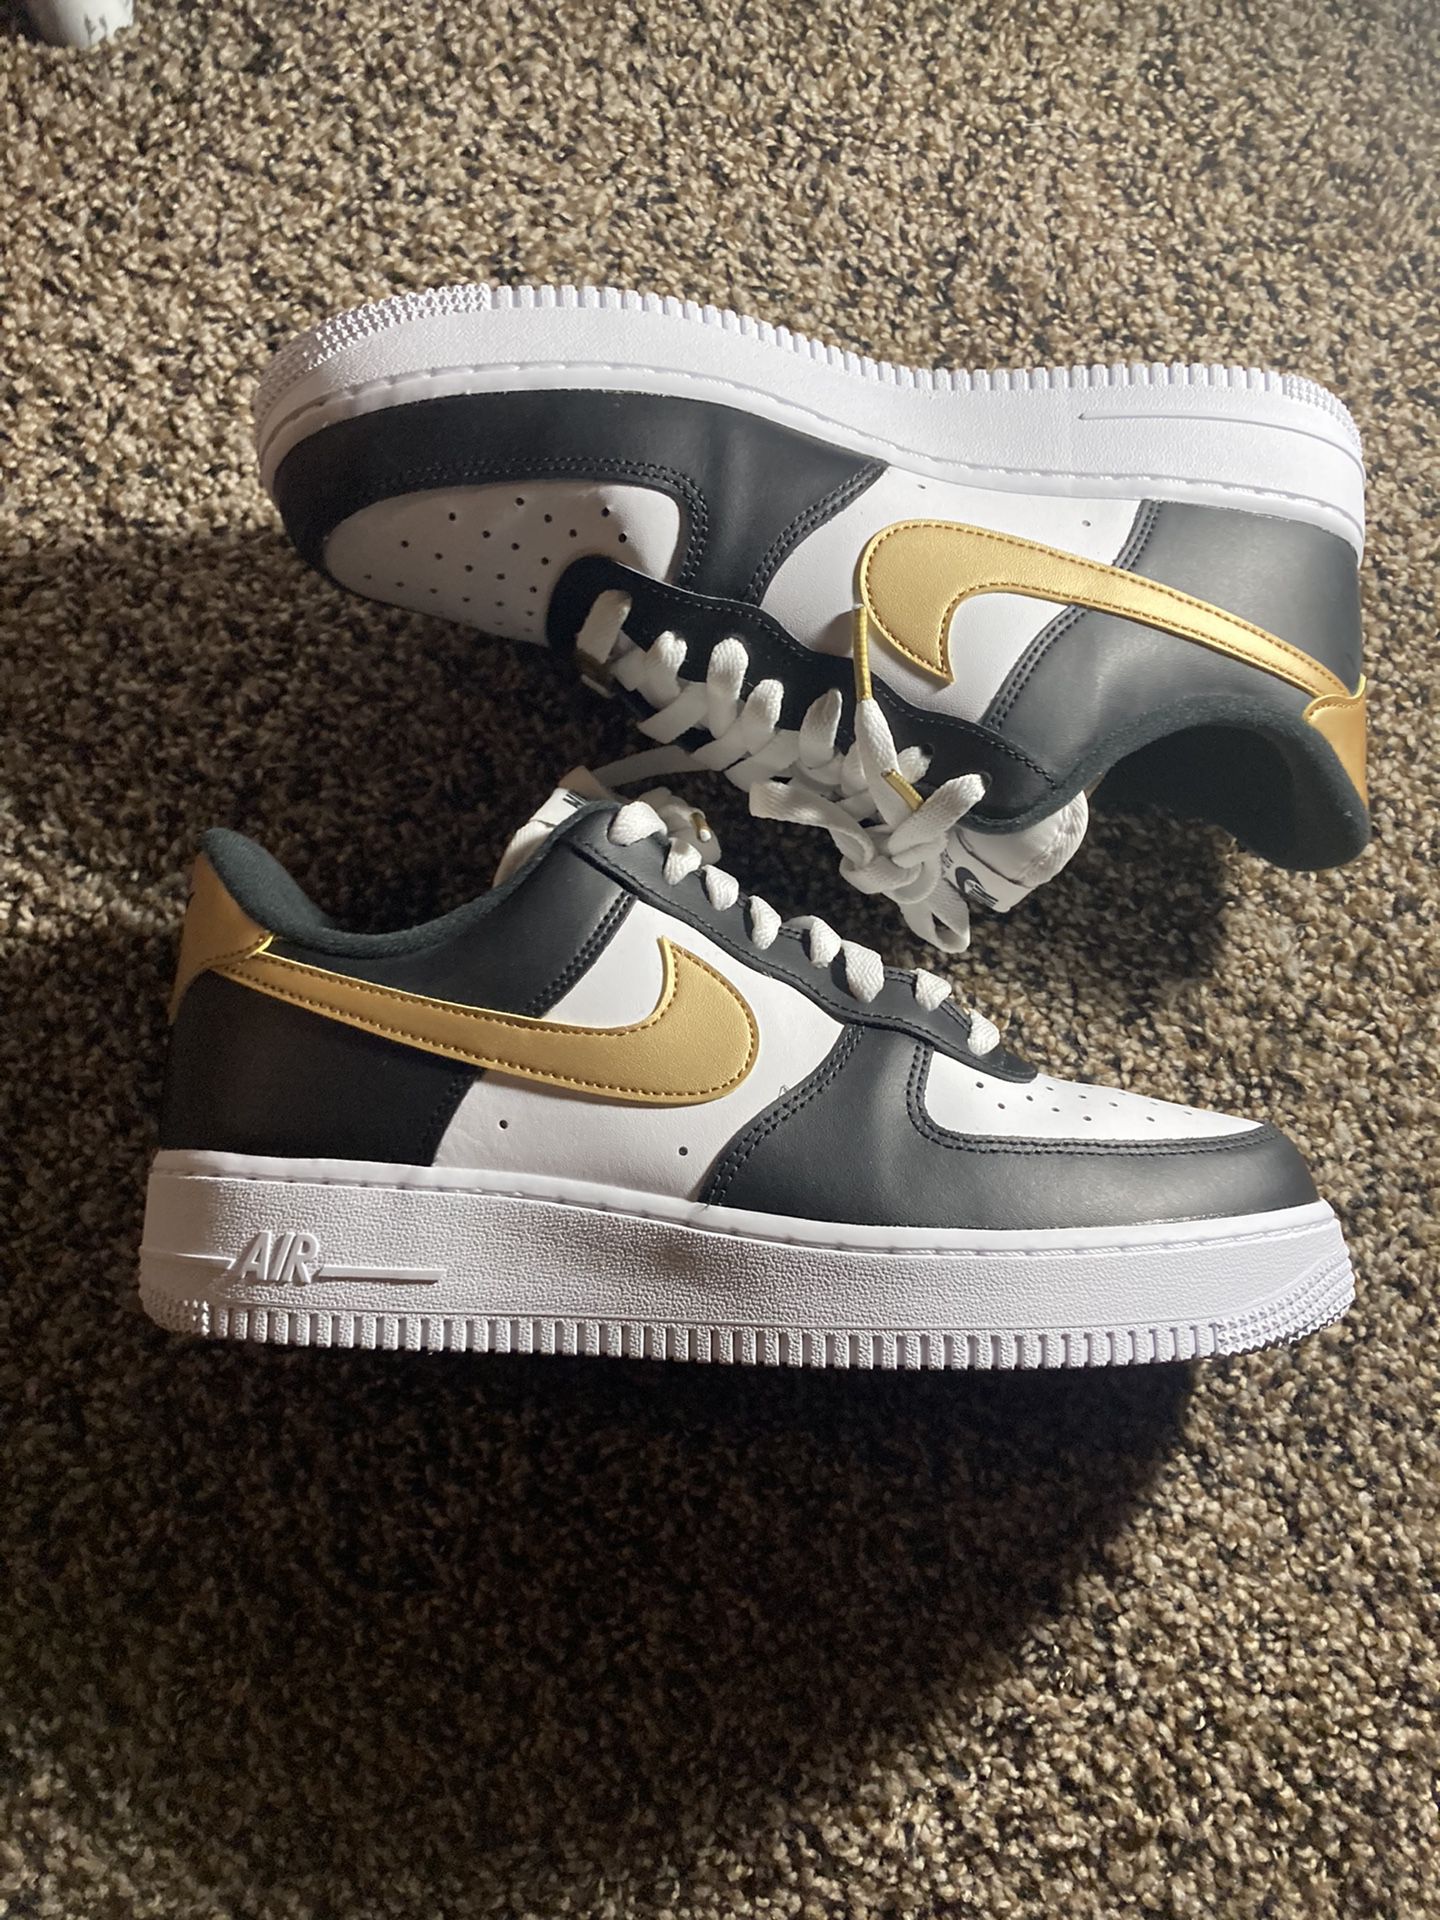 Yellow Off White AF1 for Sale in Garland, TX - OfferUp